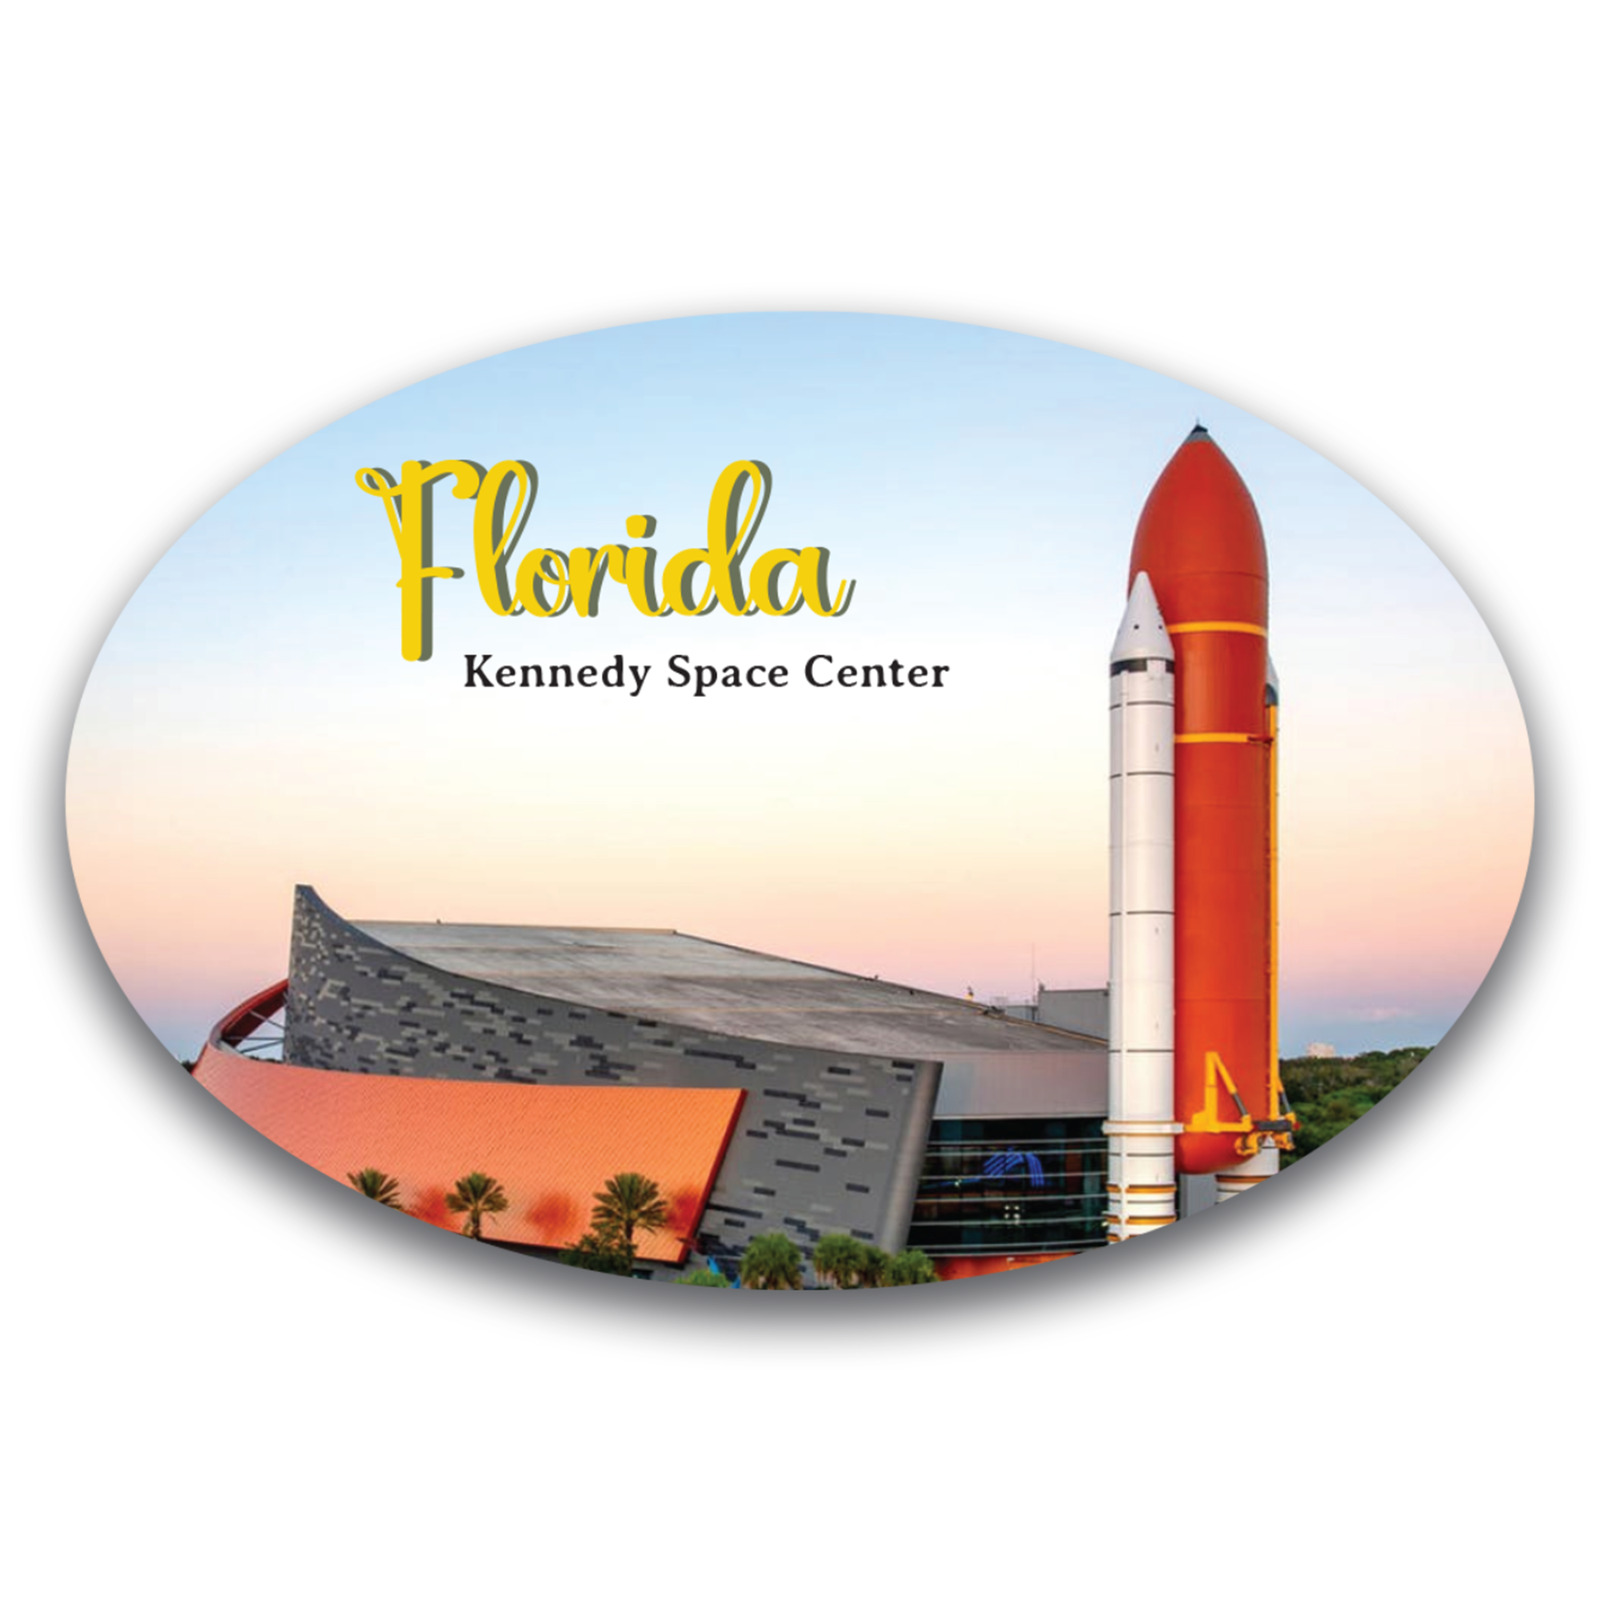 Magnet Me Up Florida Kennedy Space Center Oval Magnet Decal, 4x6 Inches